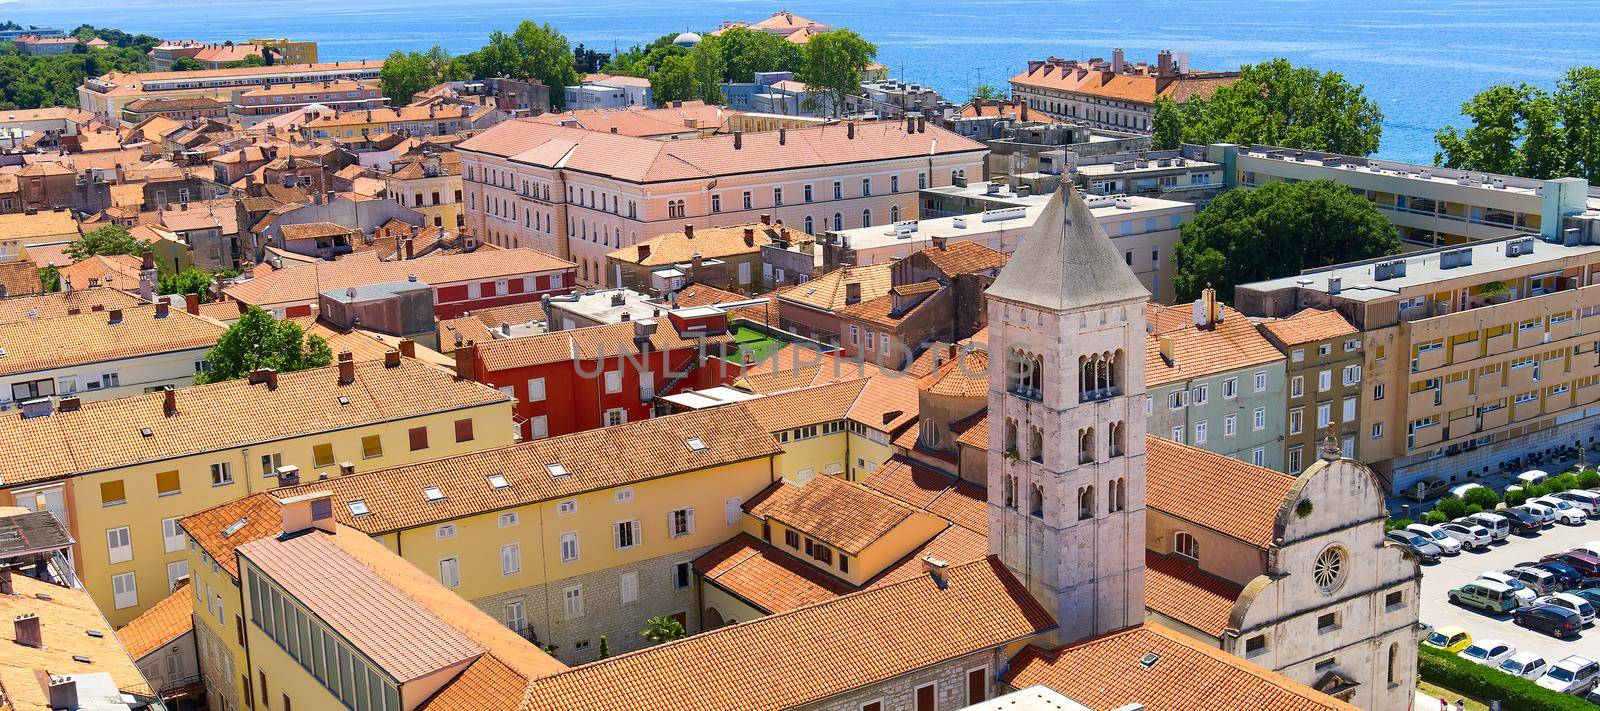 Top view of the old town, sea and mountains. Zadar, Croatia. by PhotoTime